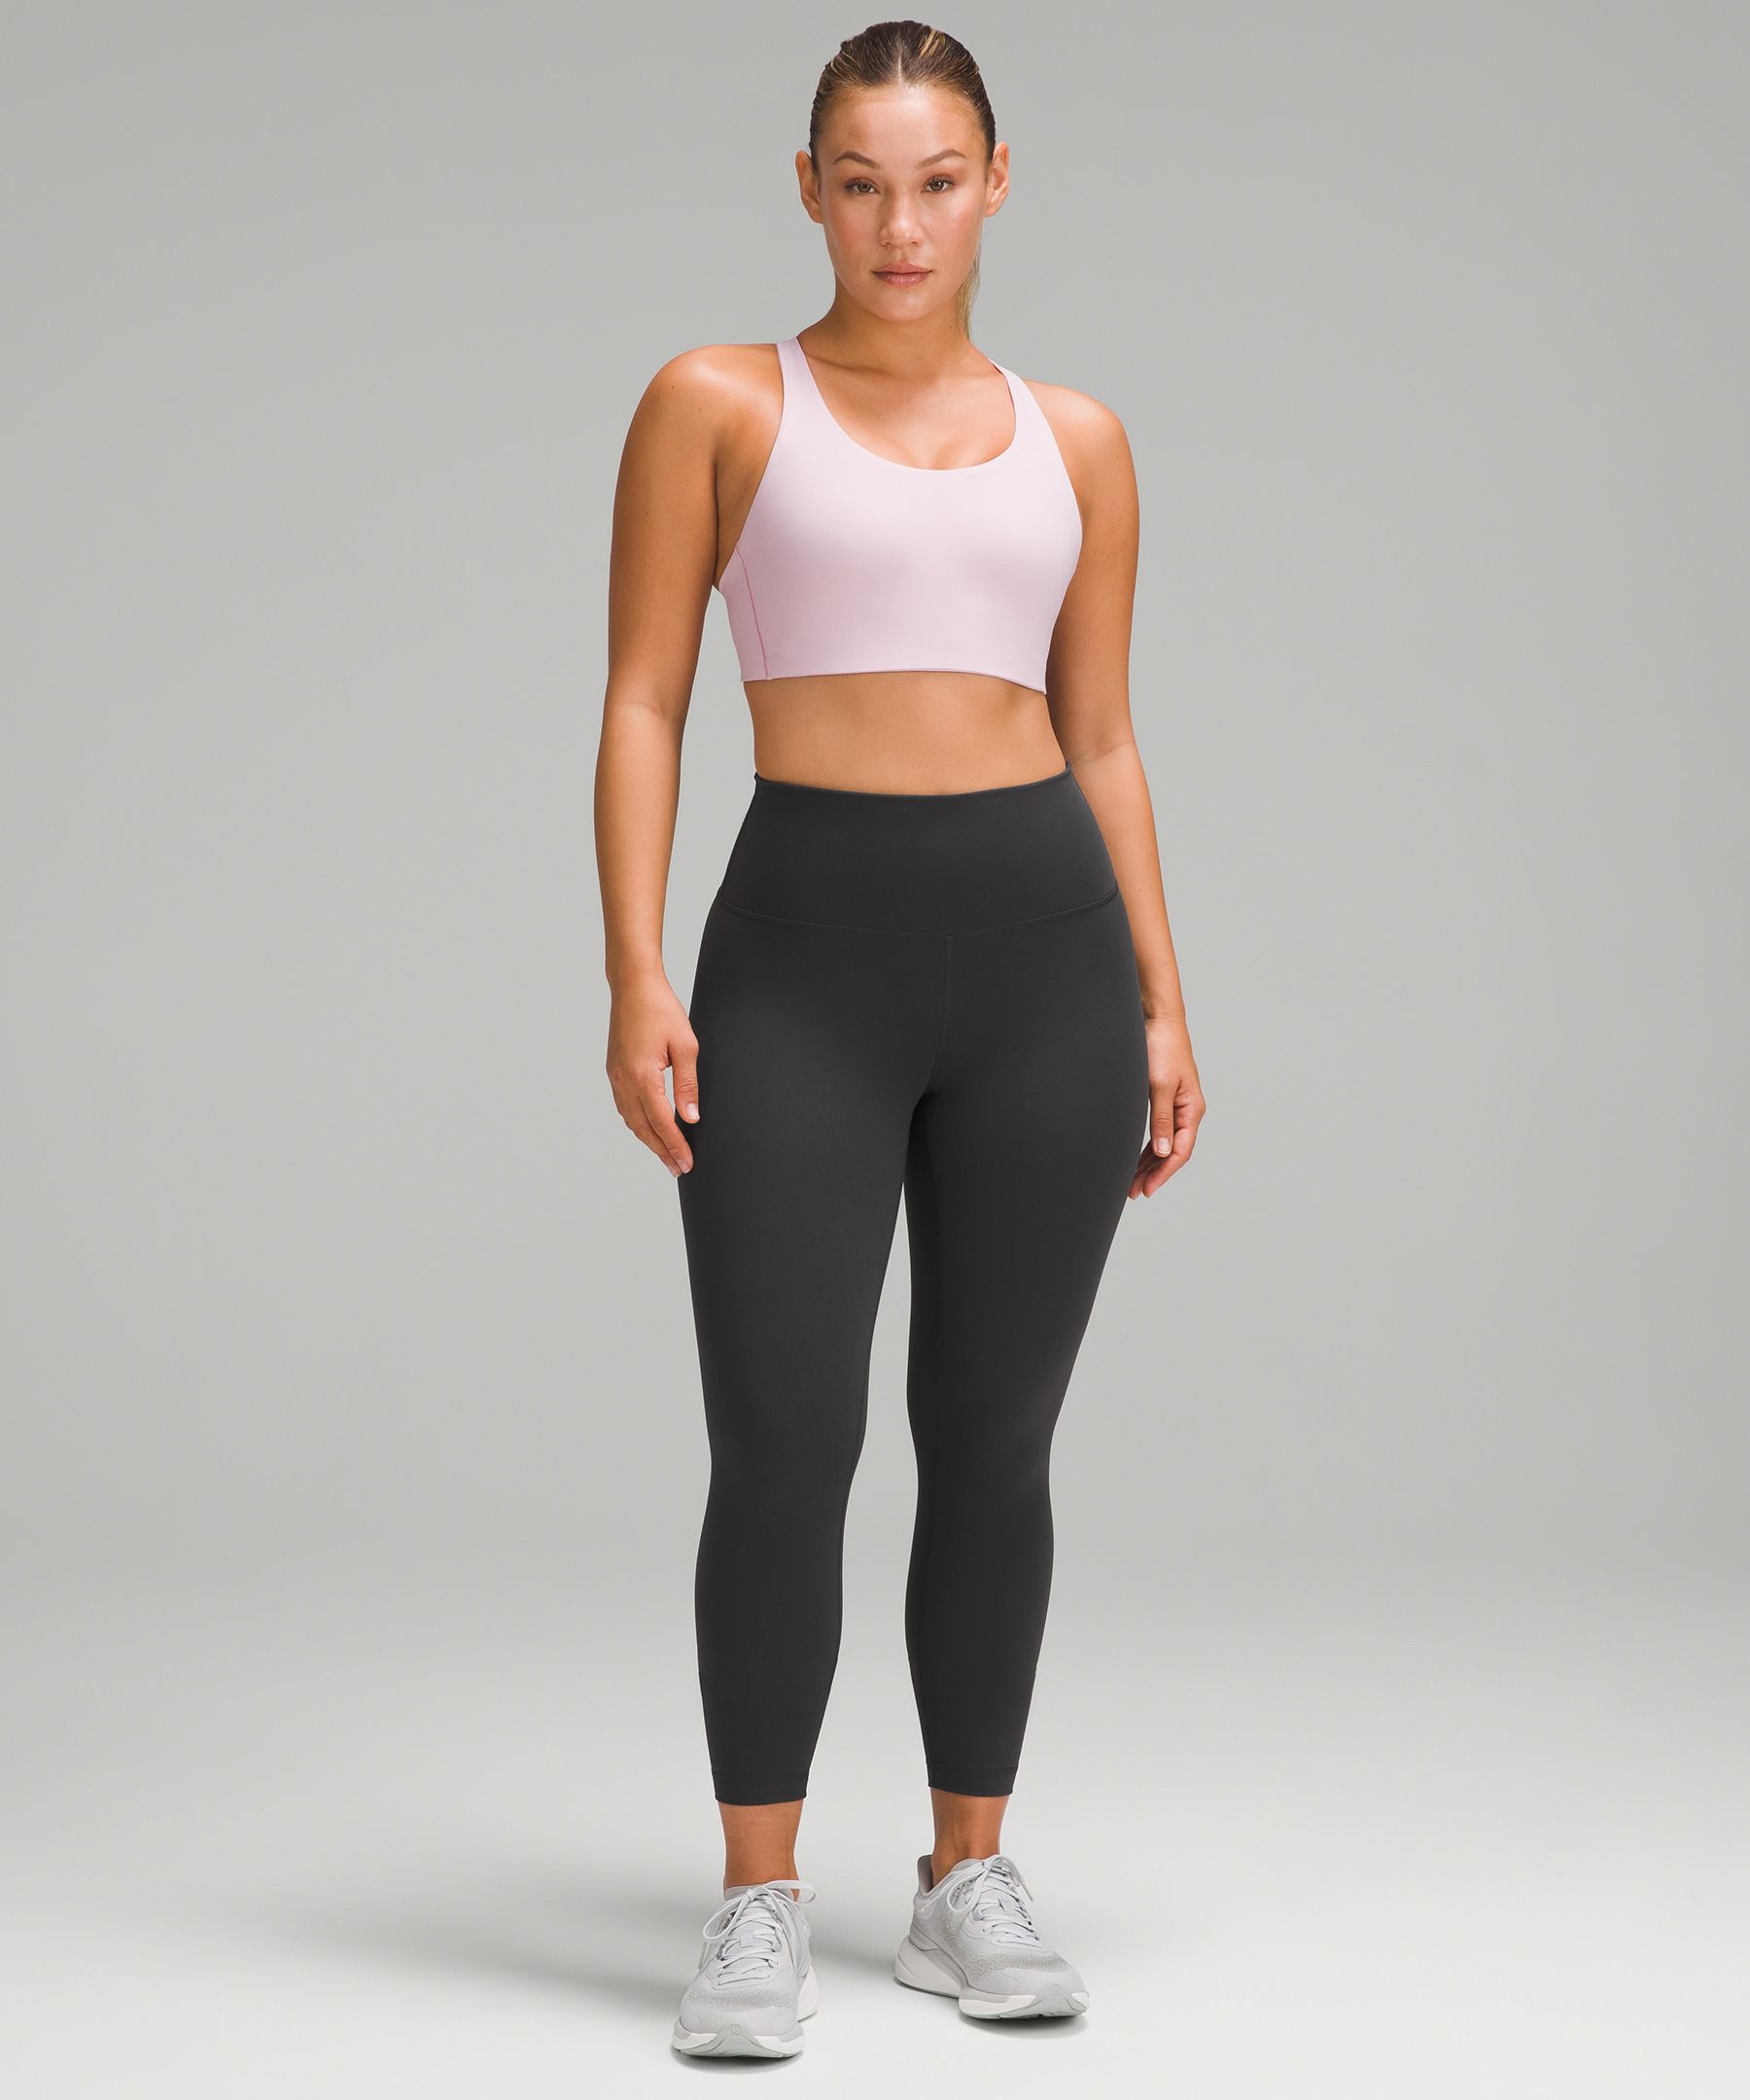 Ok how are these leggings? Paragon? I like lululemon contour fit as they  hold me just right but like these colors and what they are claiming. Do  they feel cheap like some